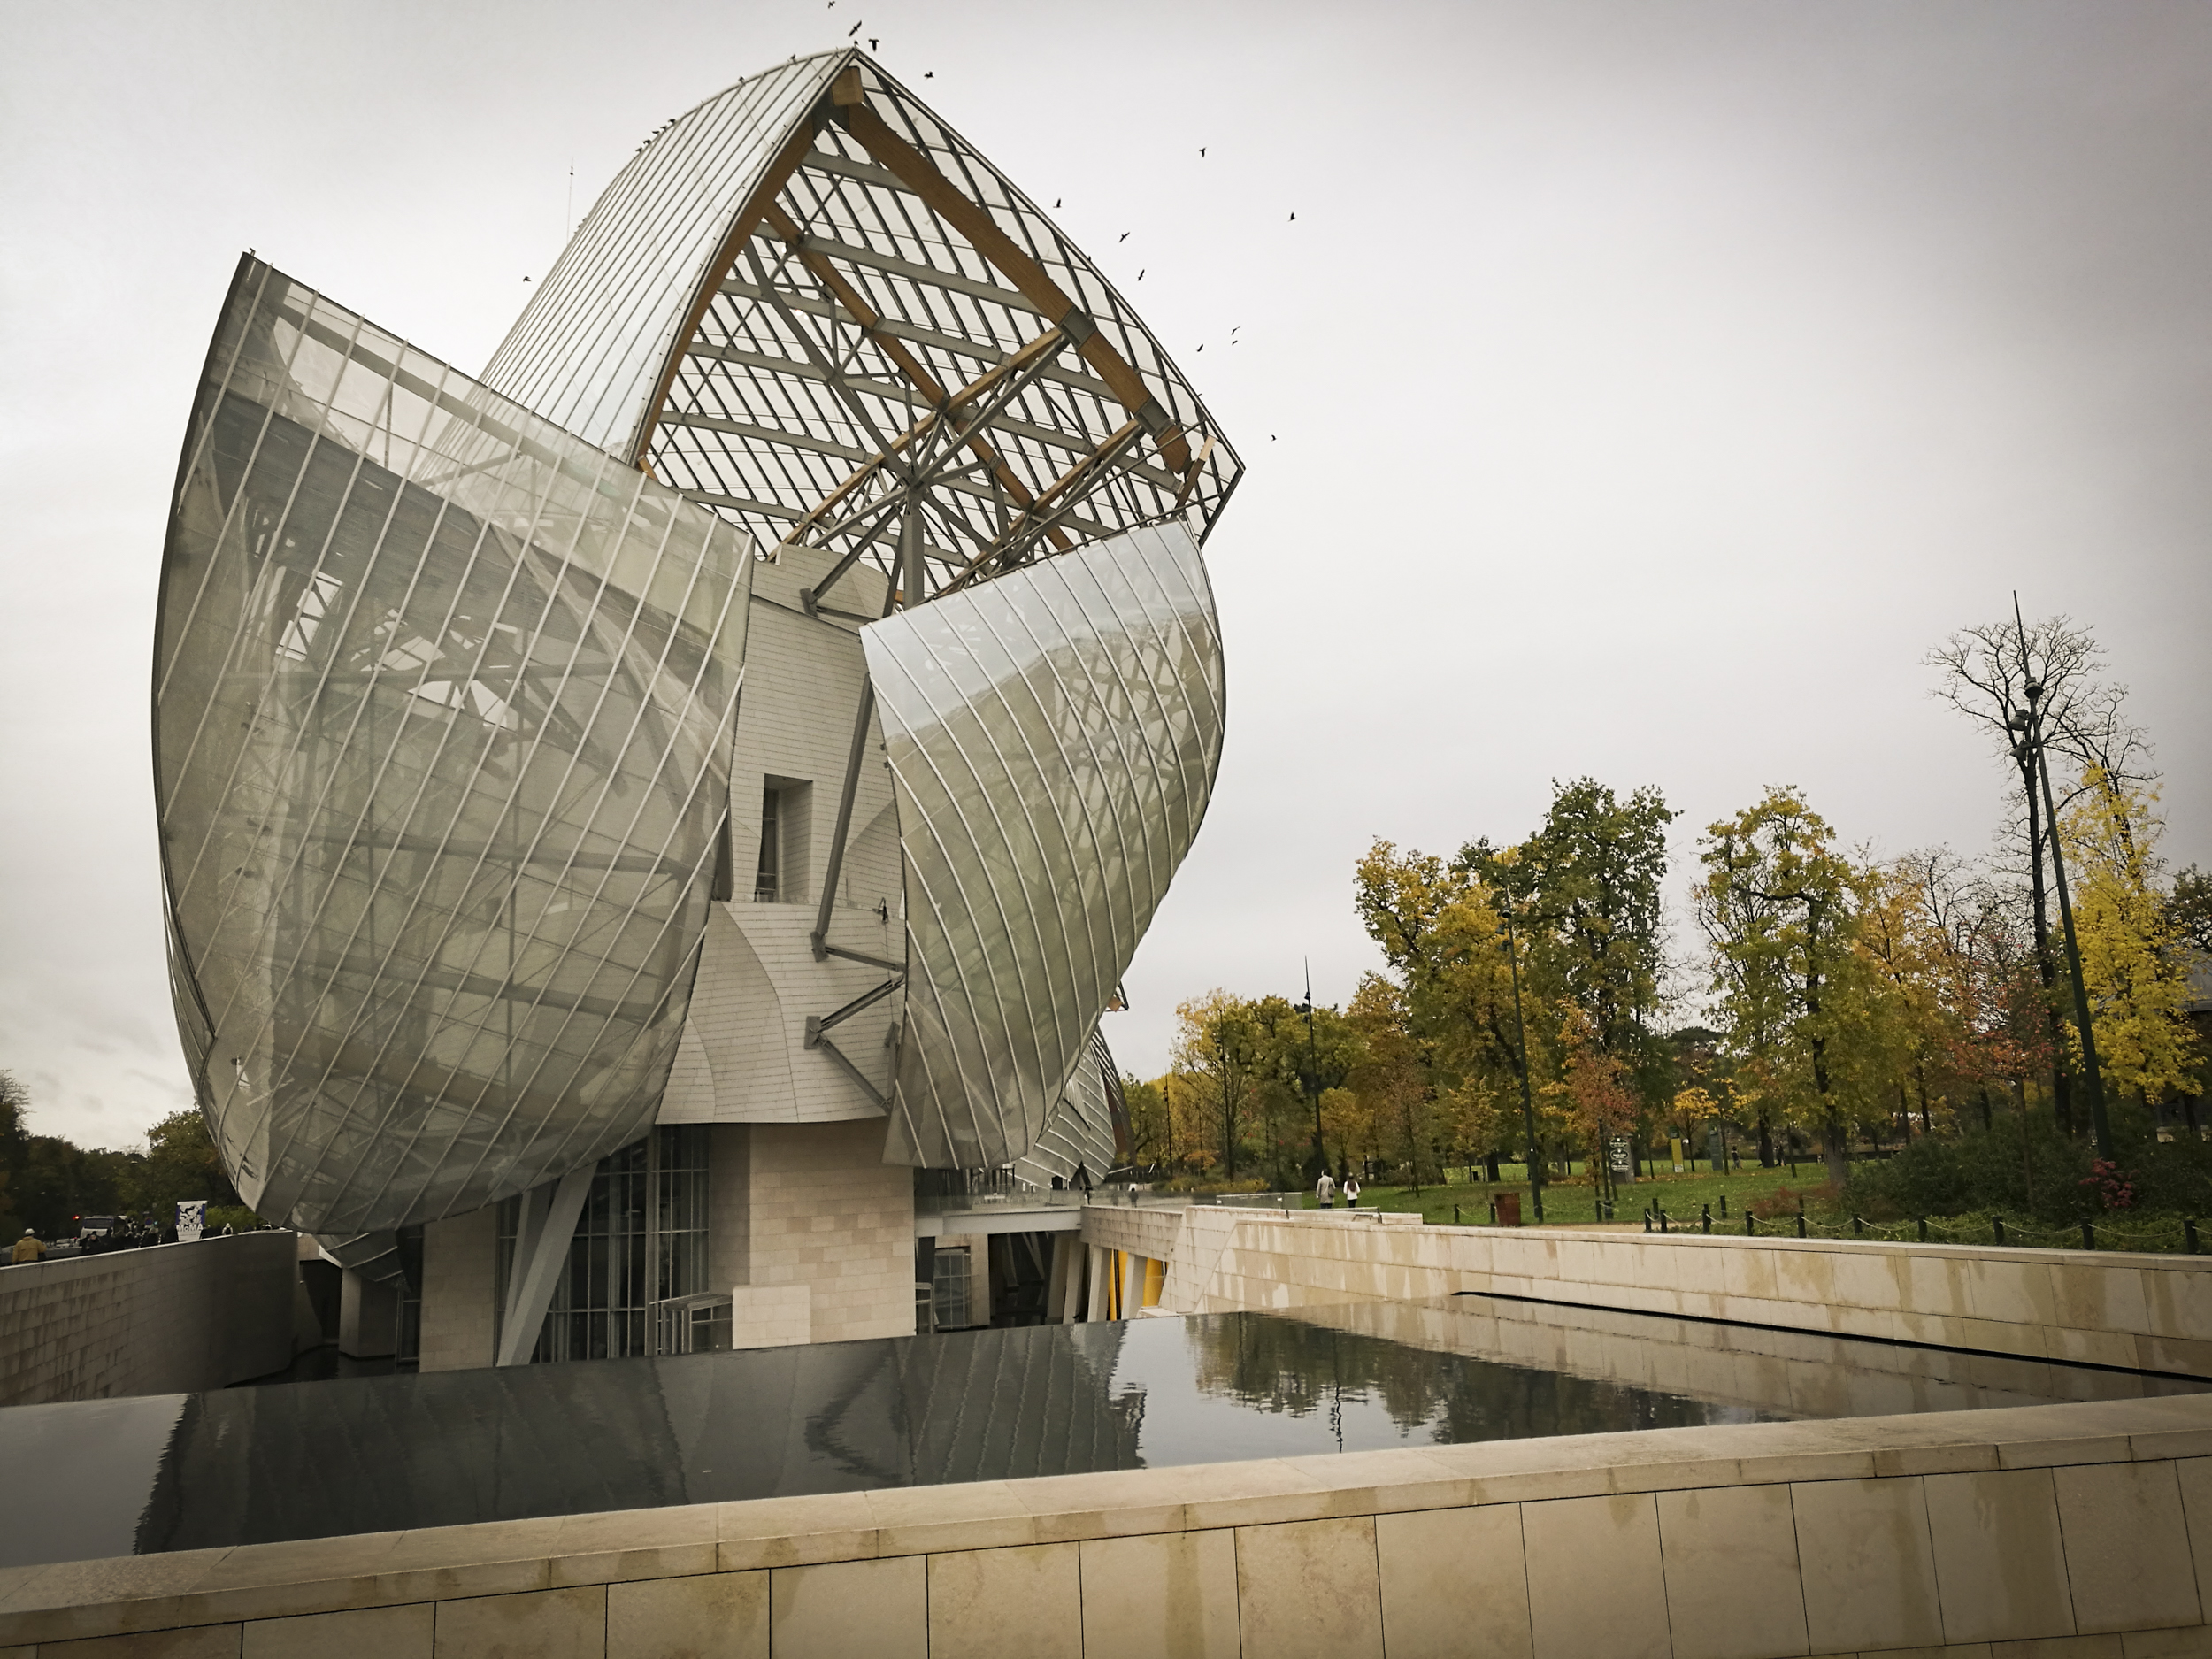 Fondation Louis Vuitton, Designed by Frank Gehry, Opens in Paris